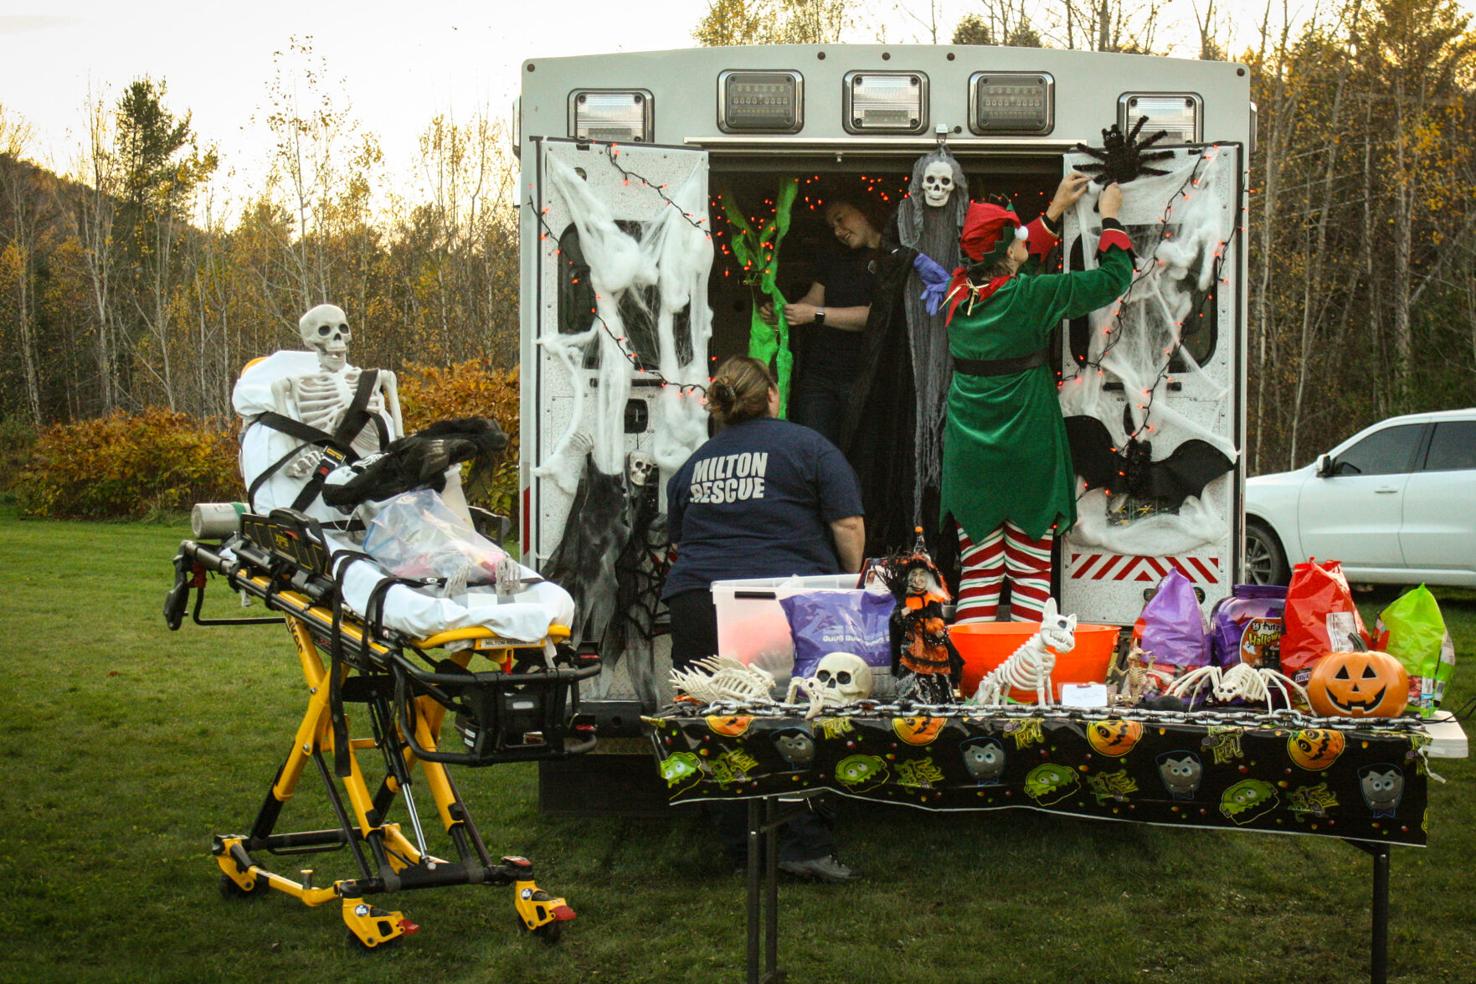 PHOTOS Ghoulish delights and grinning faces at Milton’s Trunk or Treat